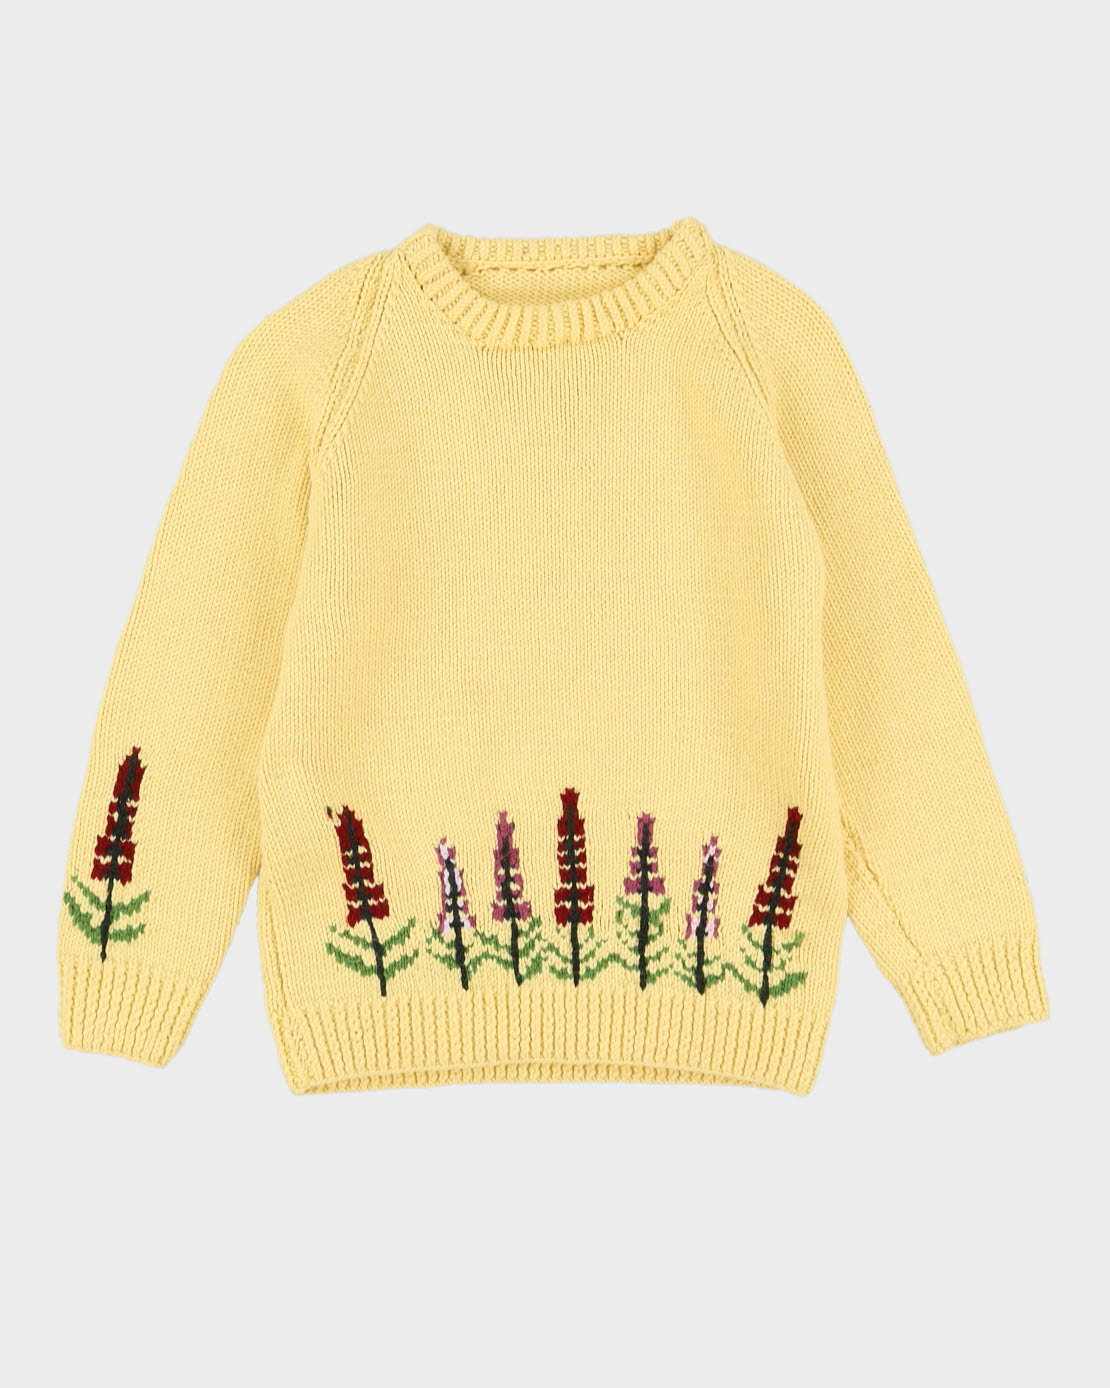 Yellow Patterned Hand-Knitted Jumper - M